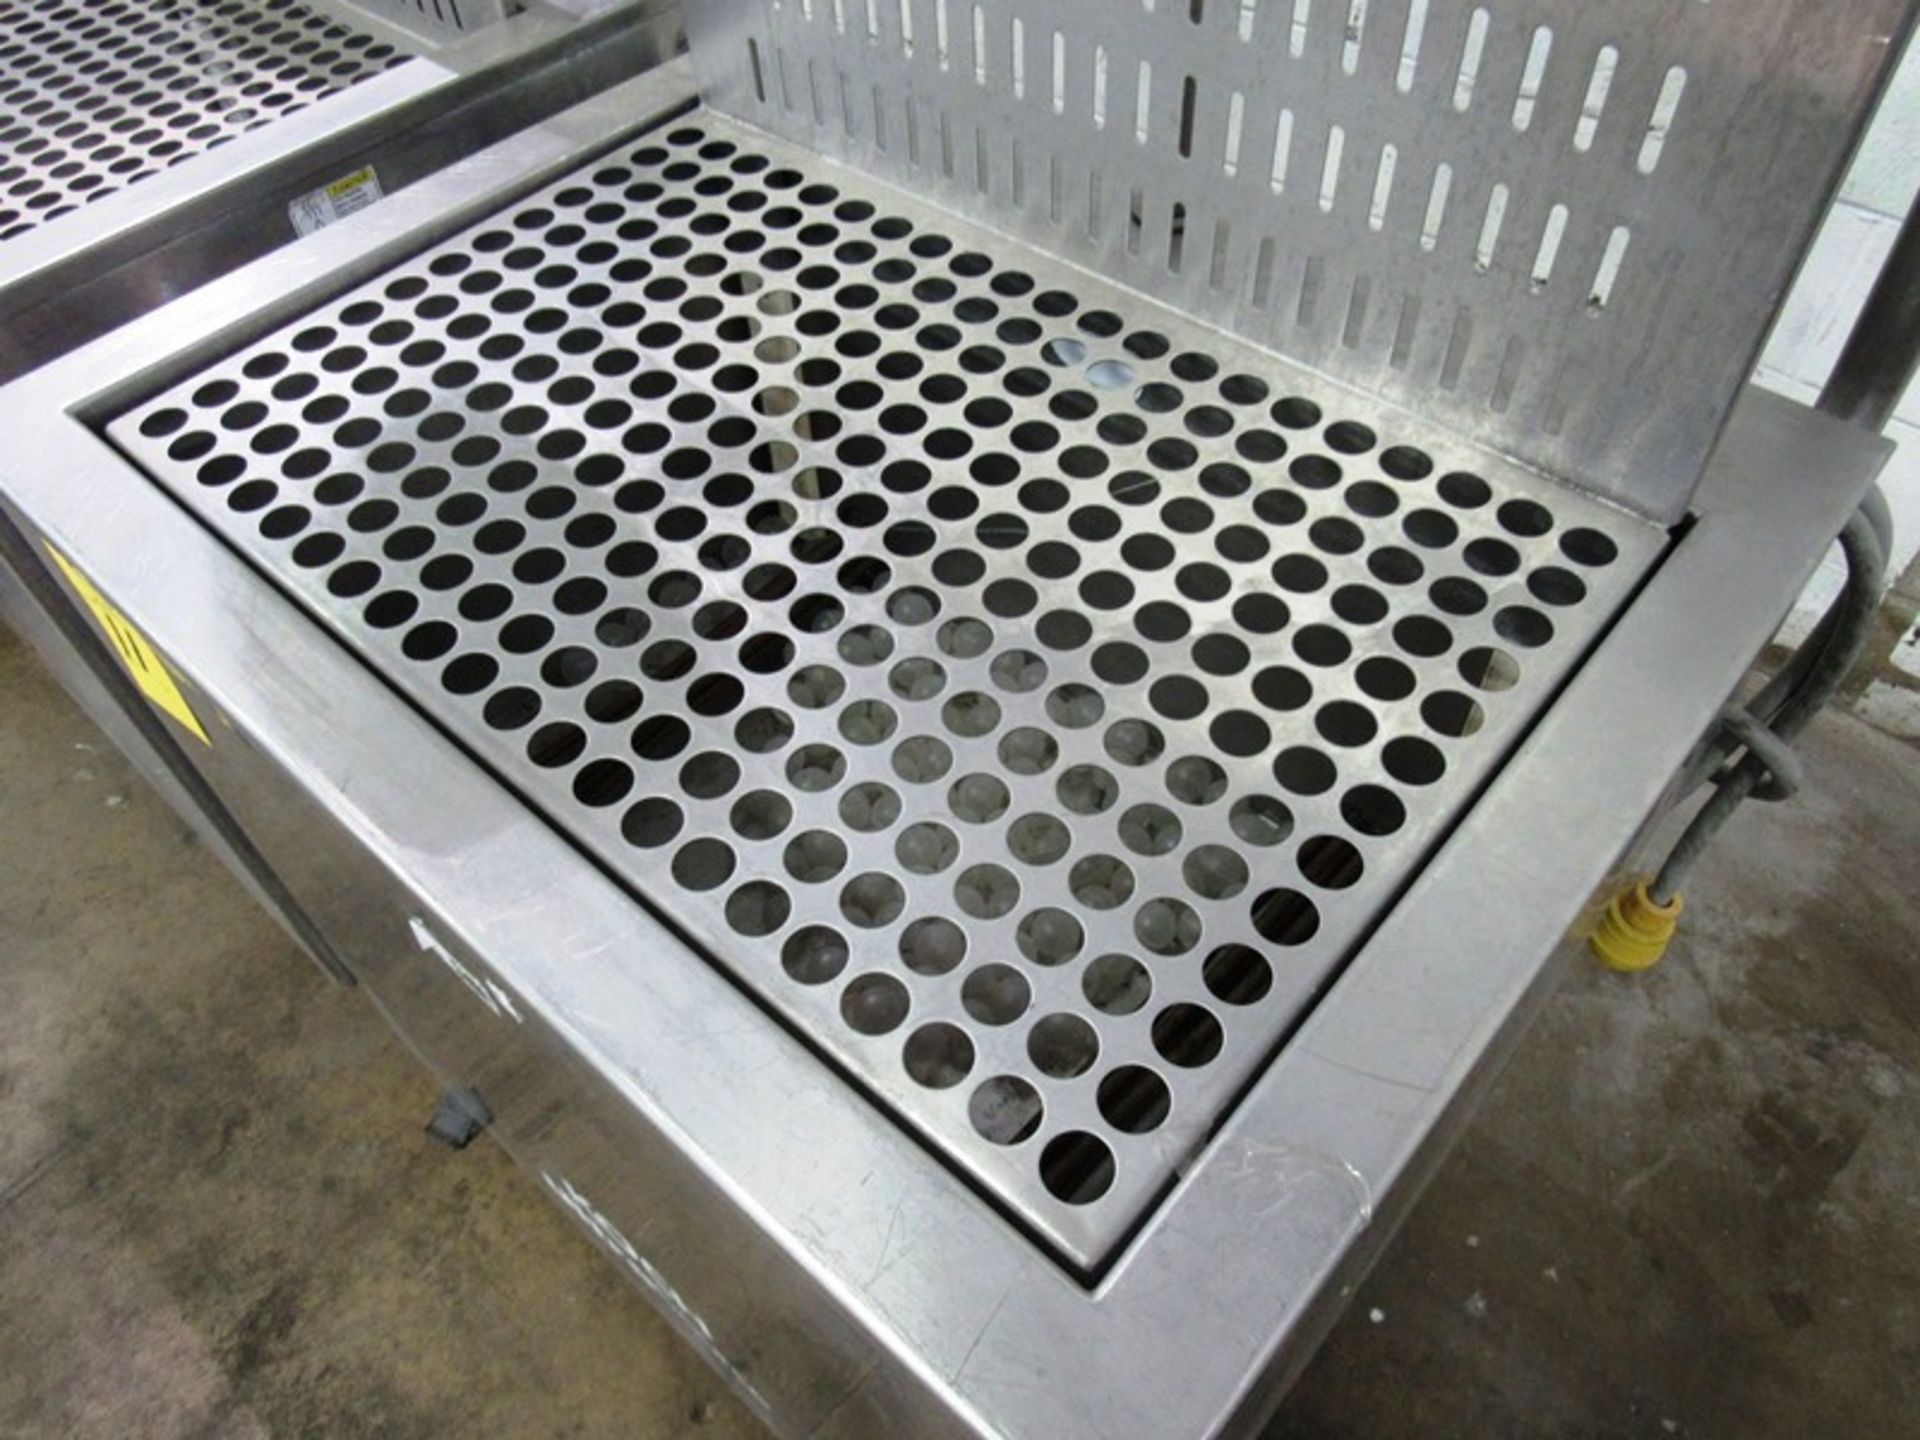 Koch Mdl. US2818 Portable Stainless Steel Dip Tank, 208 volts, 3 phase - Image 3 of 4